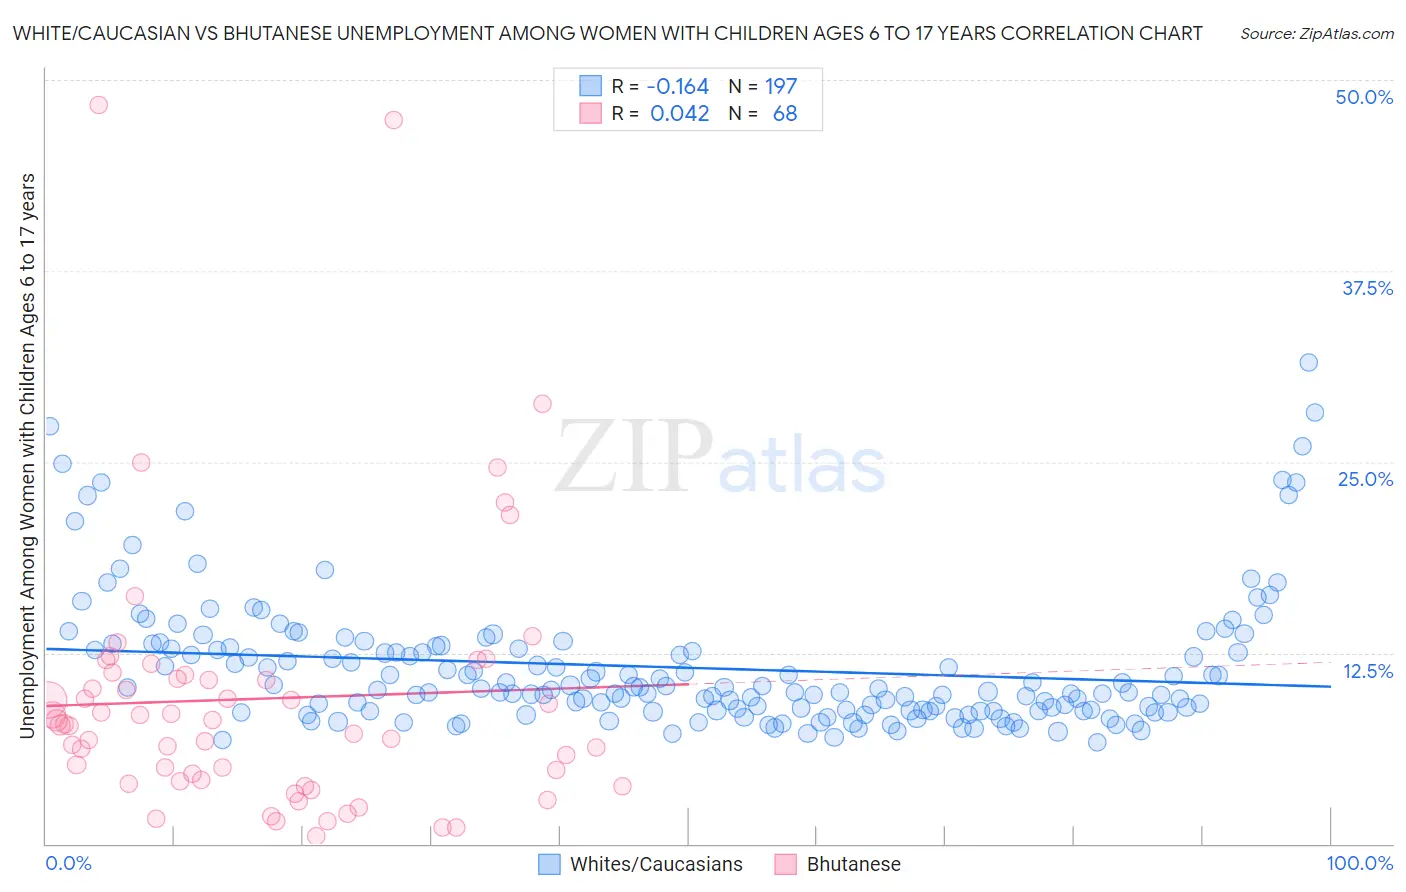 White/Caucasian vs Bhutanese Unemployment Among Women with Children Ages 6 to 17 years